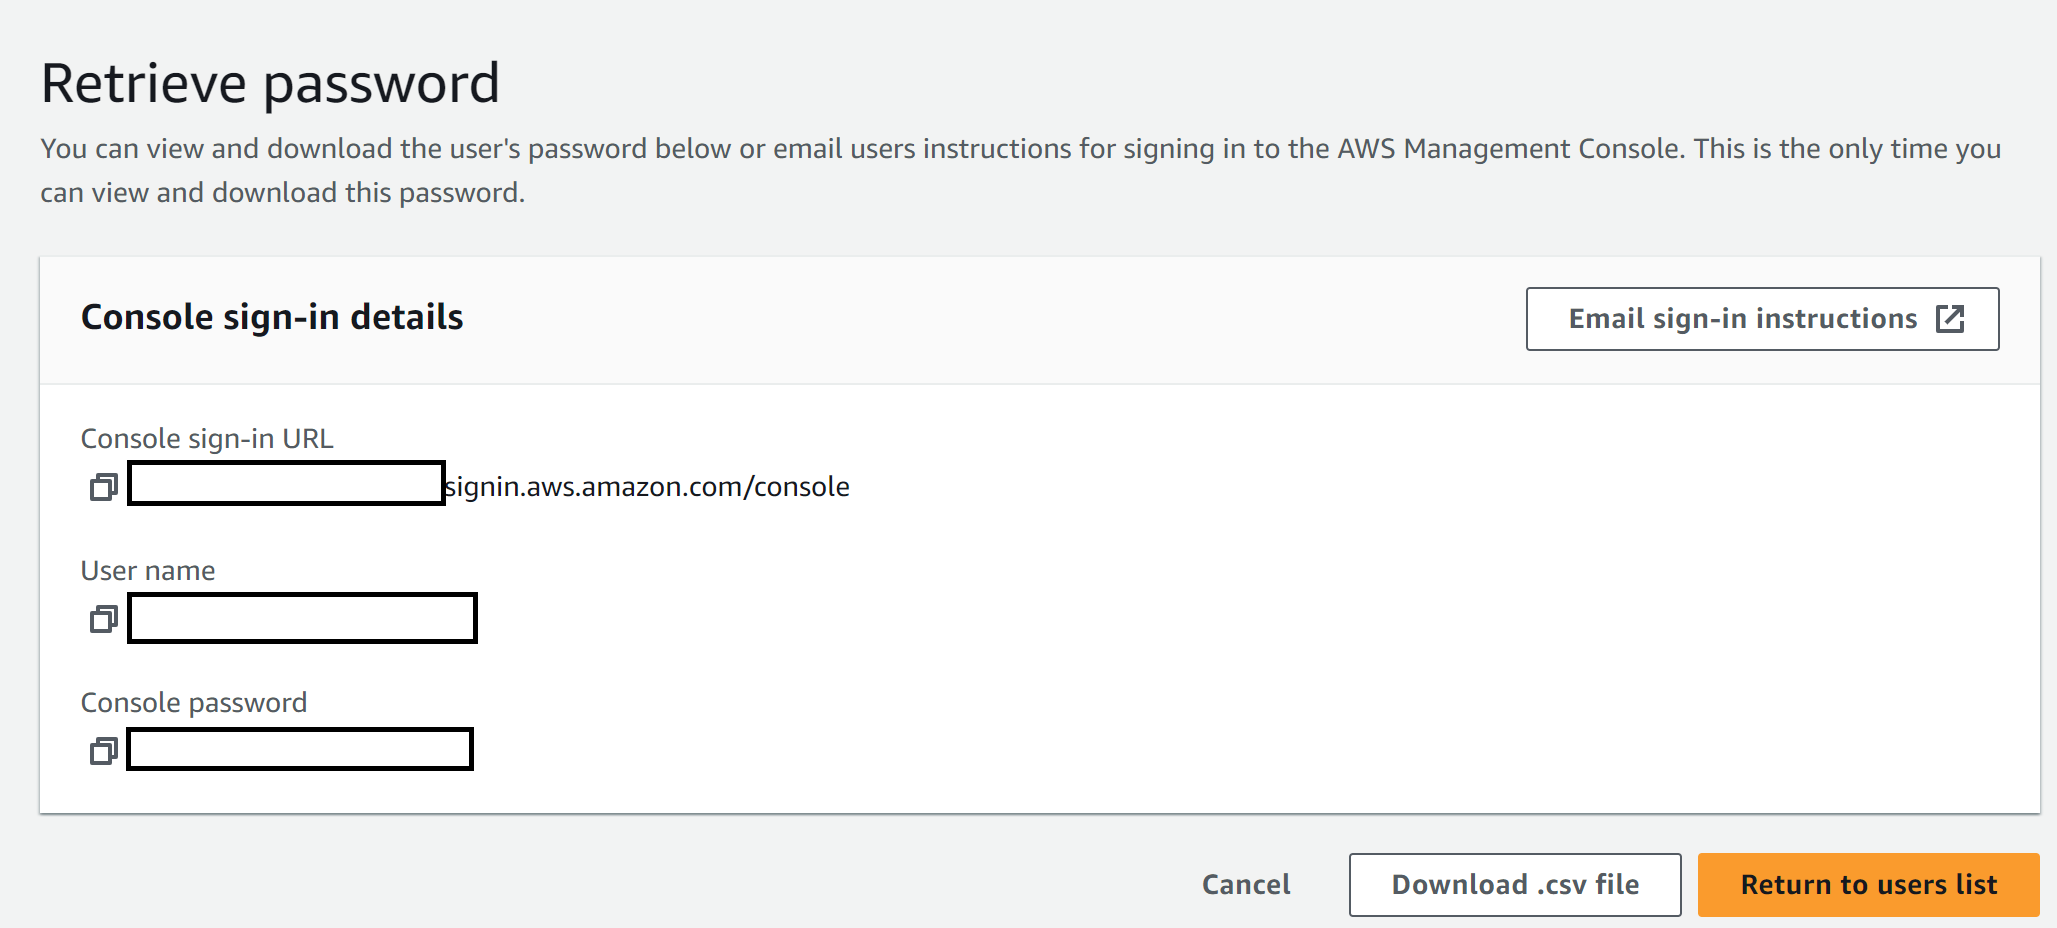 Screenshot of a password retrieval page for an AWS user. It shows the sign-in URL, username, and a concealed password field, along with options to download the information, email sign-in instructions, or return to the user list.